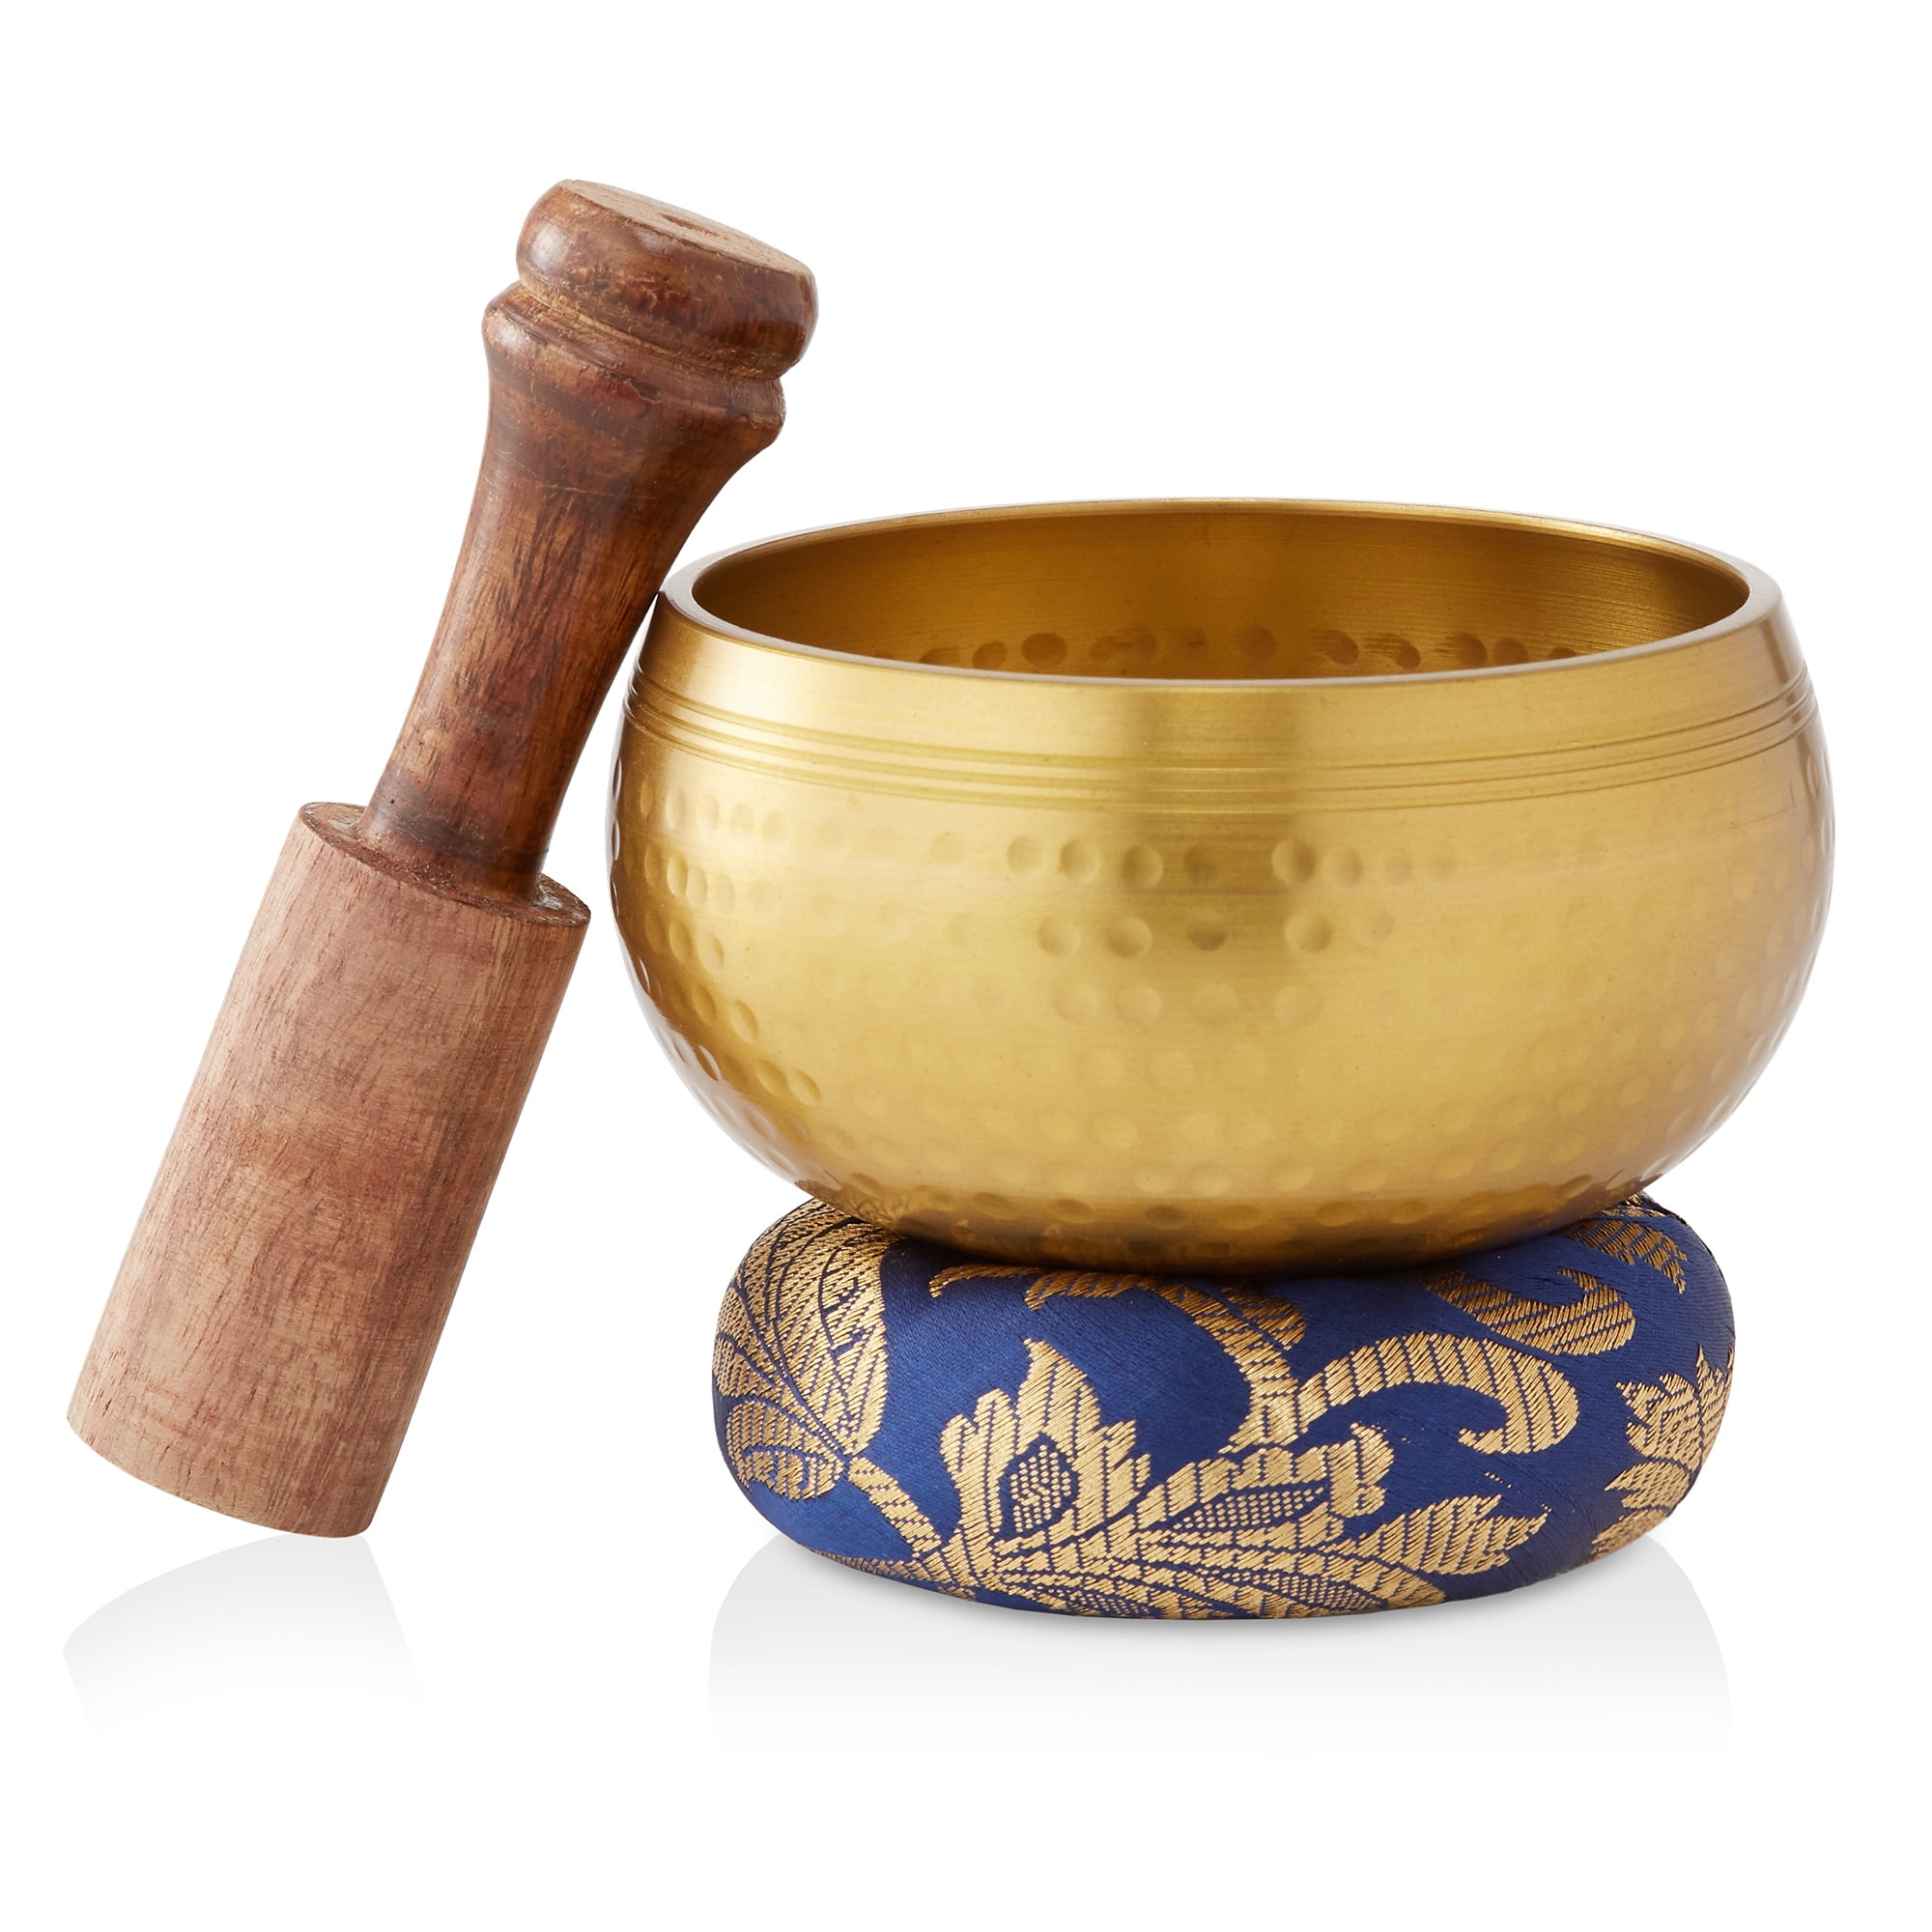 Meditation Accessories Unique Gifts for Women 4 inch Men Tibetan Singing Bowls Set-100% Hand-hammered in Nepal Sound Bowl for Meditation Chakra Yoga 